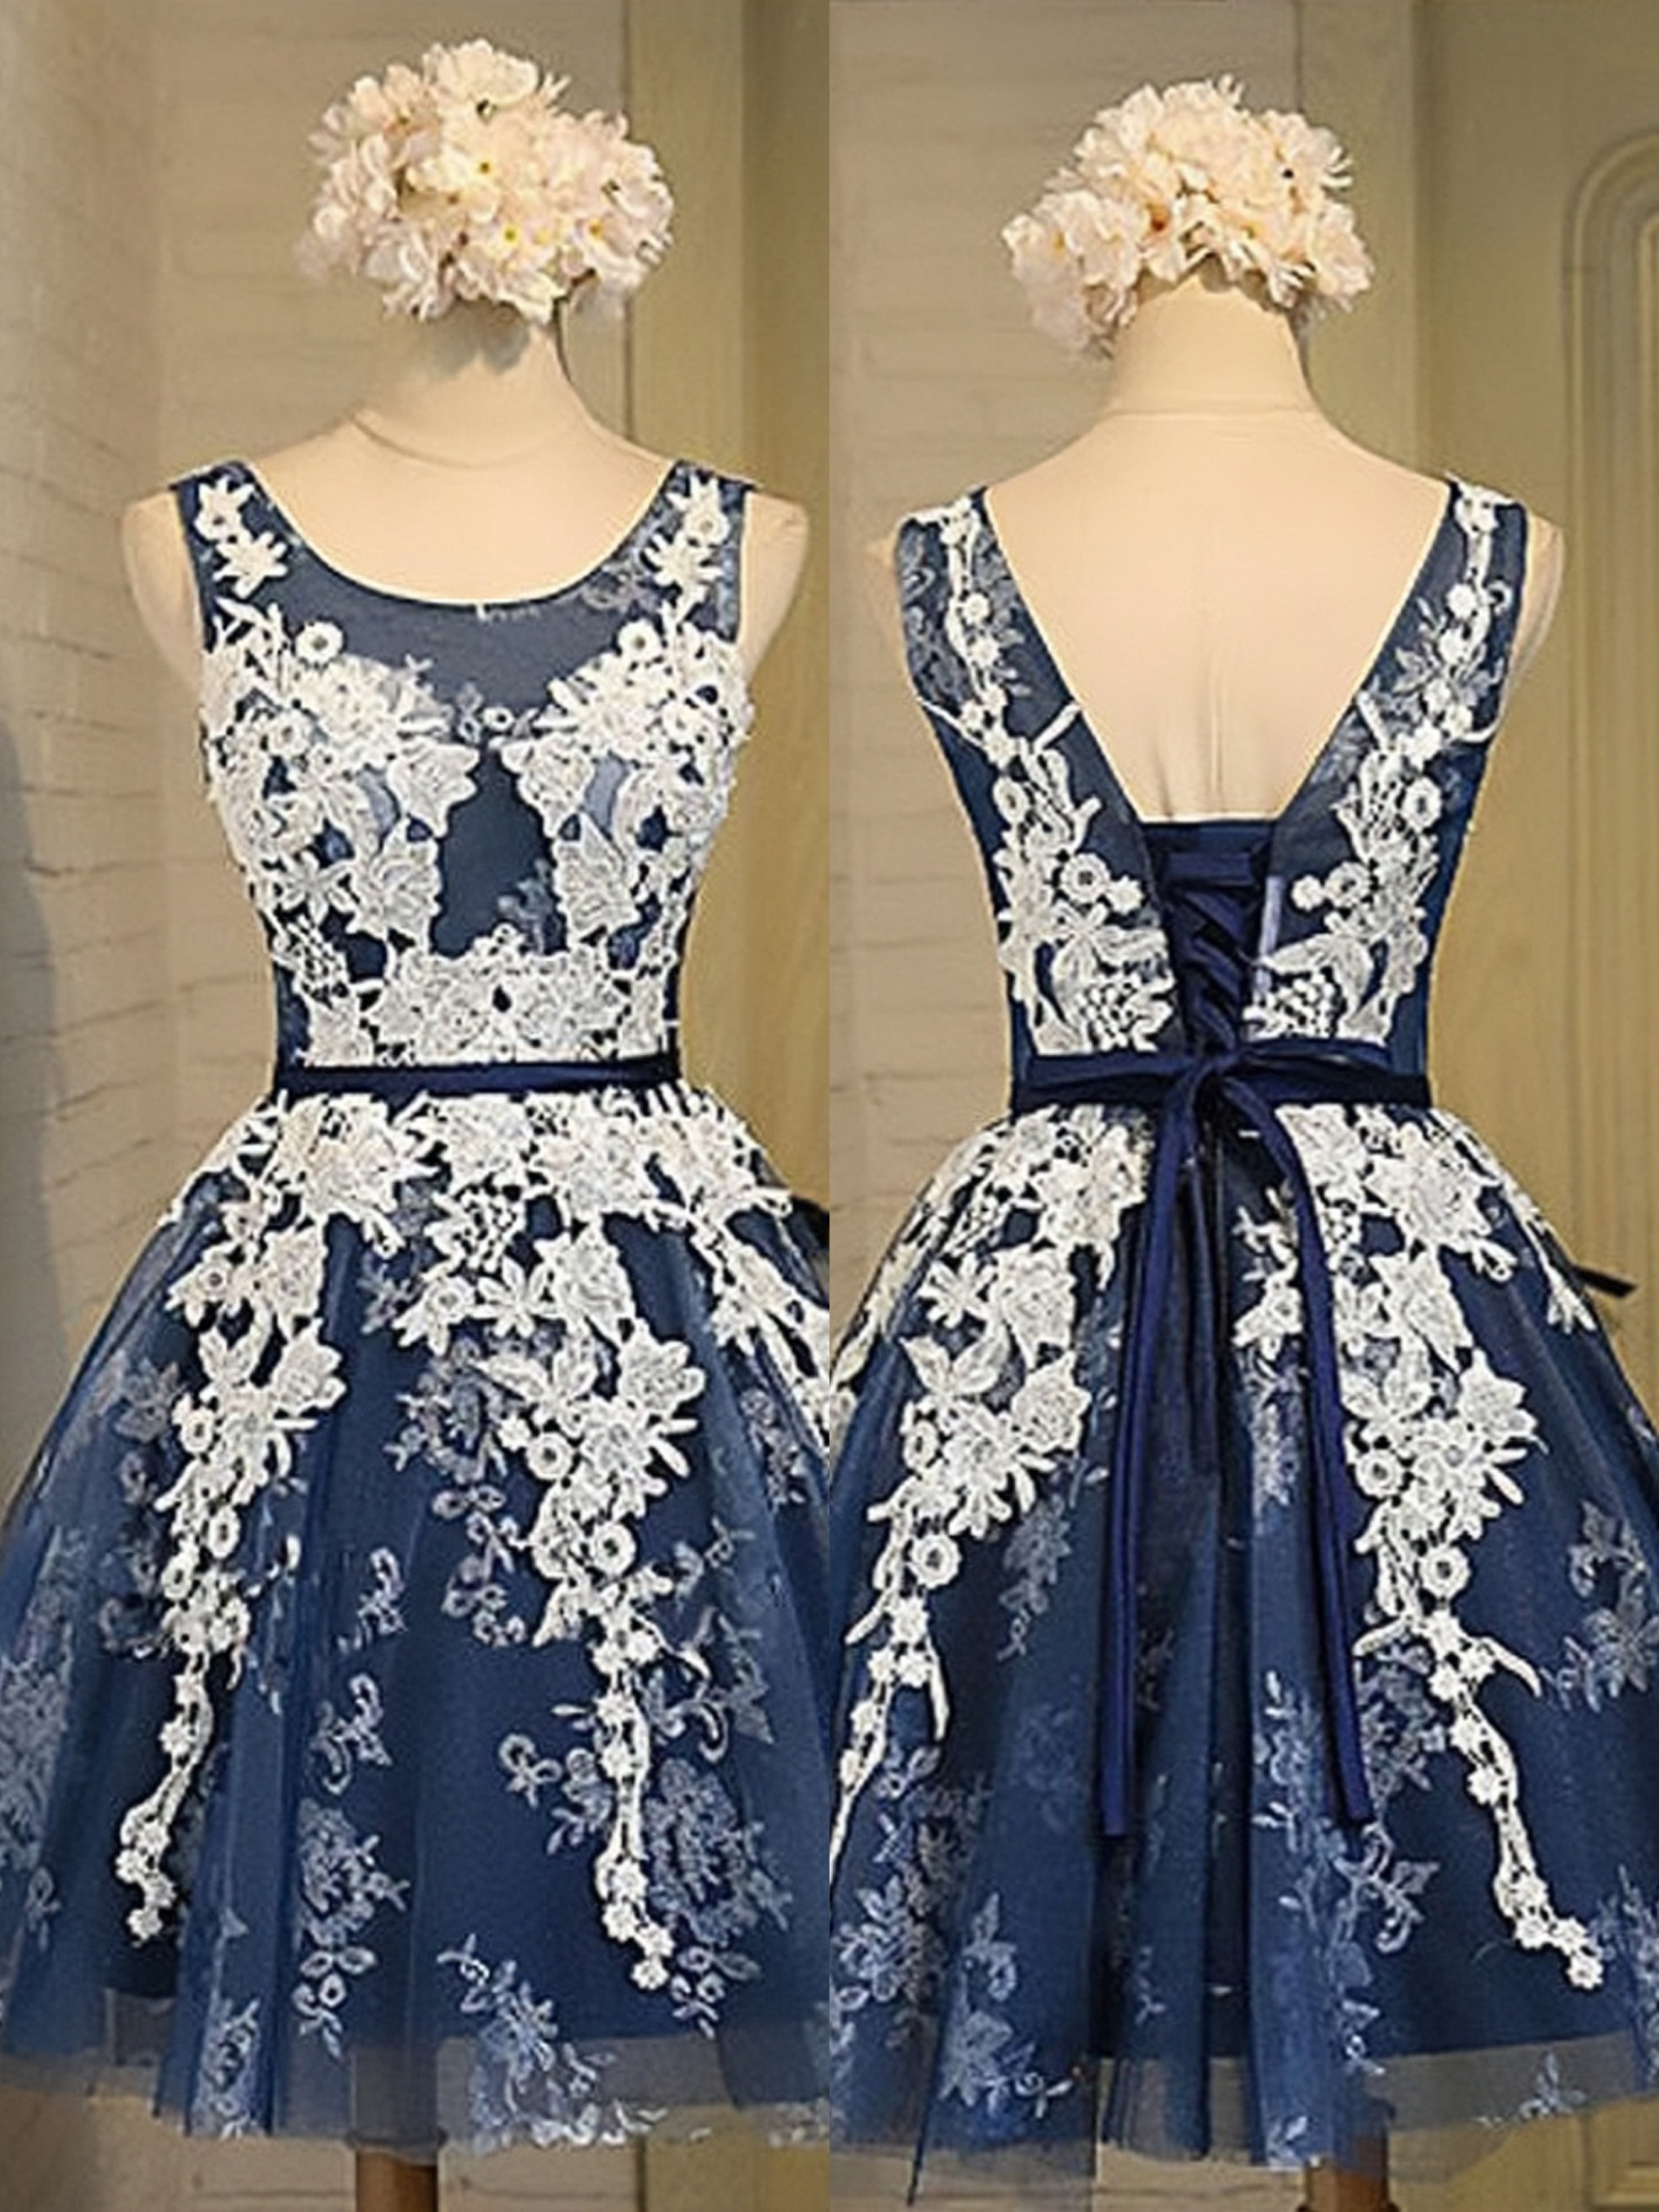 Bridesmaid Dresses Colorful, Light Blue Tulle Lace Applique Short Homecoming Dresses with Straps